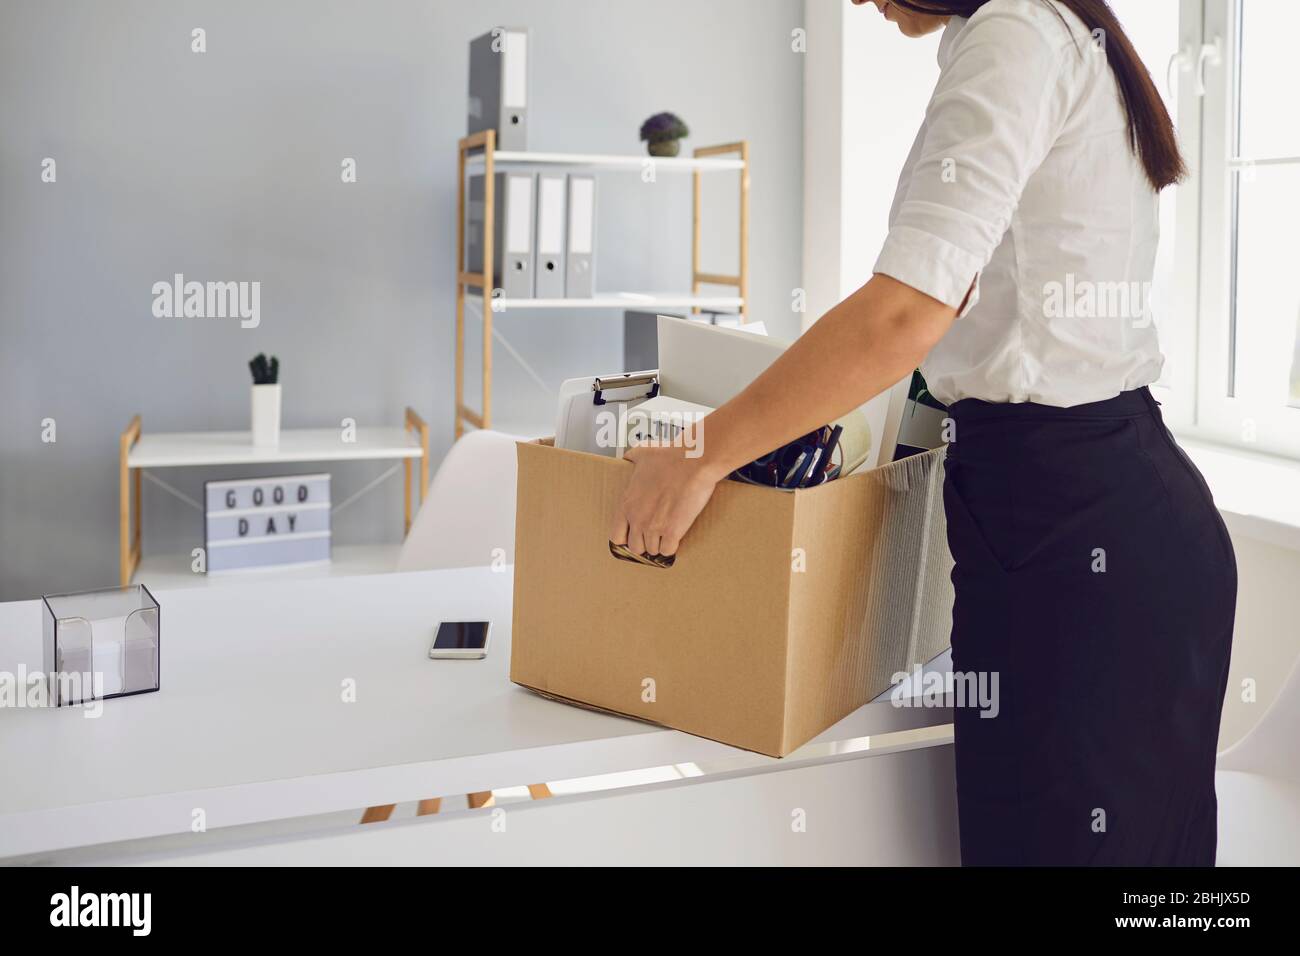 Unemployment Dismissed business woman upset with a cardboard box leaves the workplace from the office of the company. Stock Photo